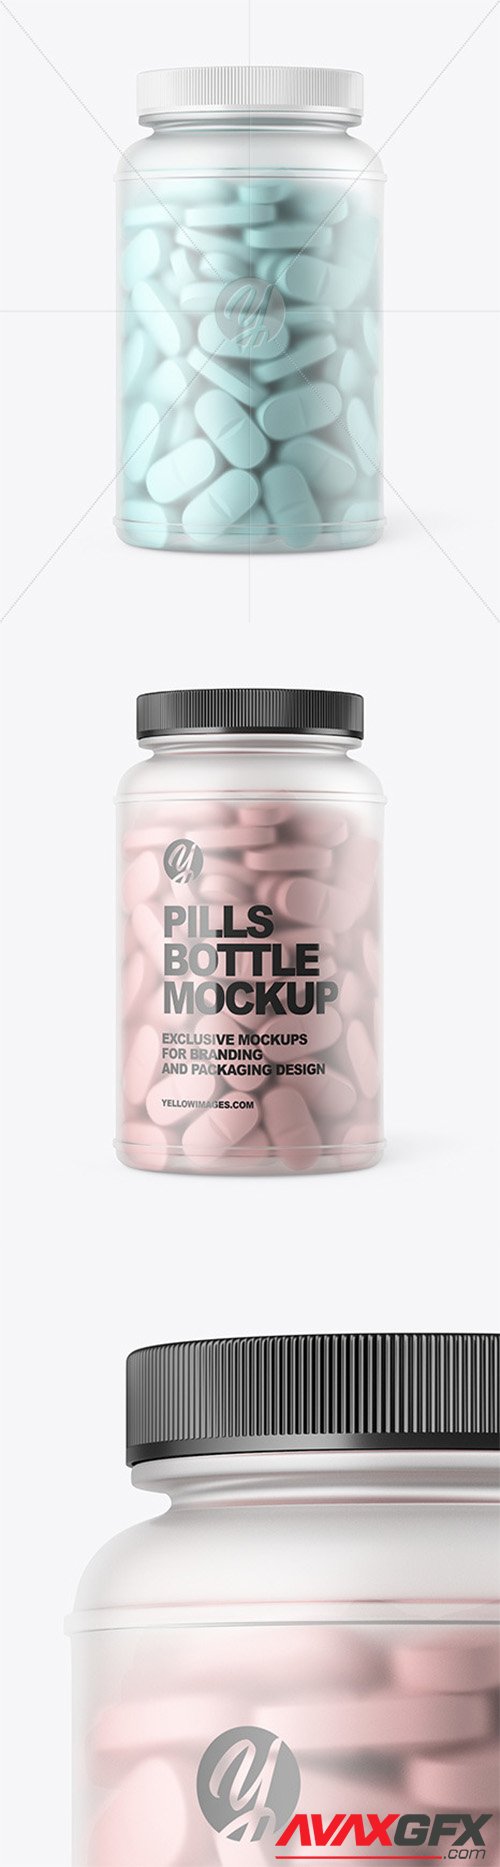 Download Frosted Pills Bottle Mockup 56645 Avaxgfx All Downloads That You Need In One Place Graphic From Nitroflare Rapidgator Yellowimages Mockups